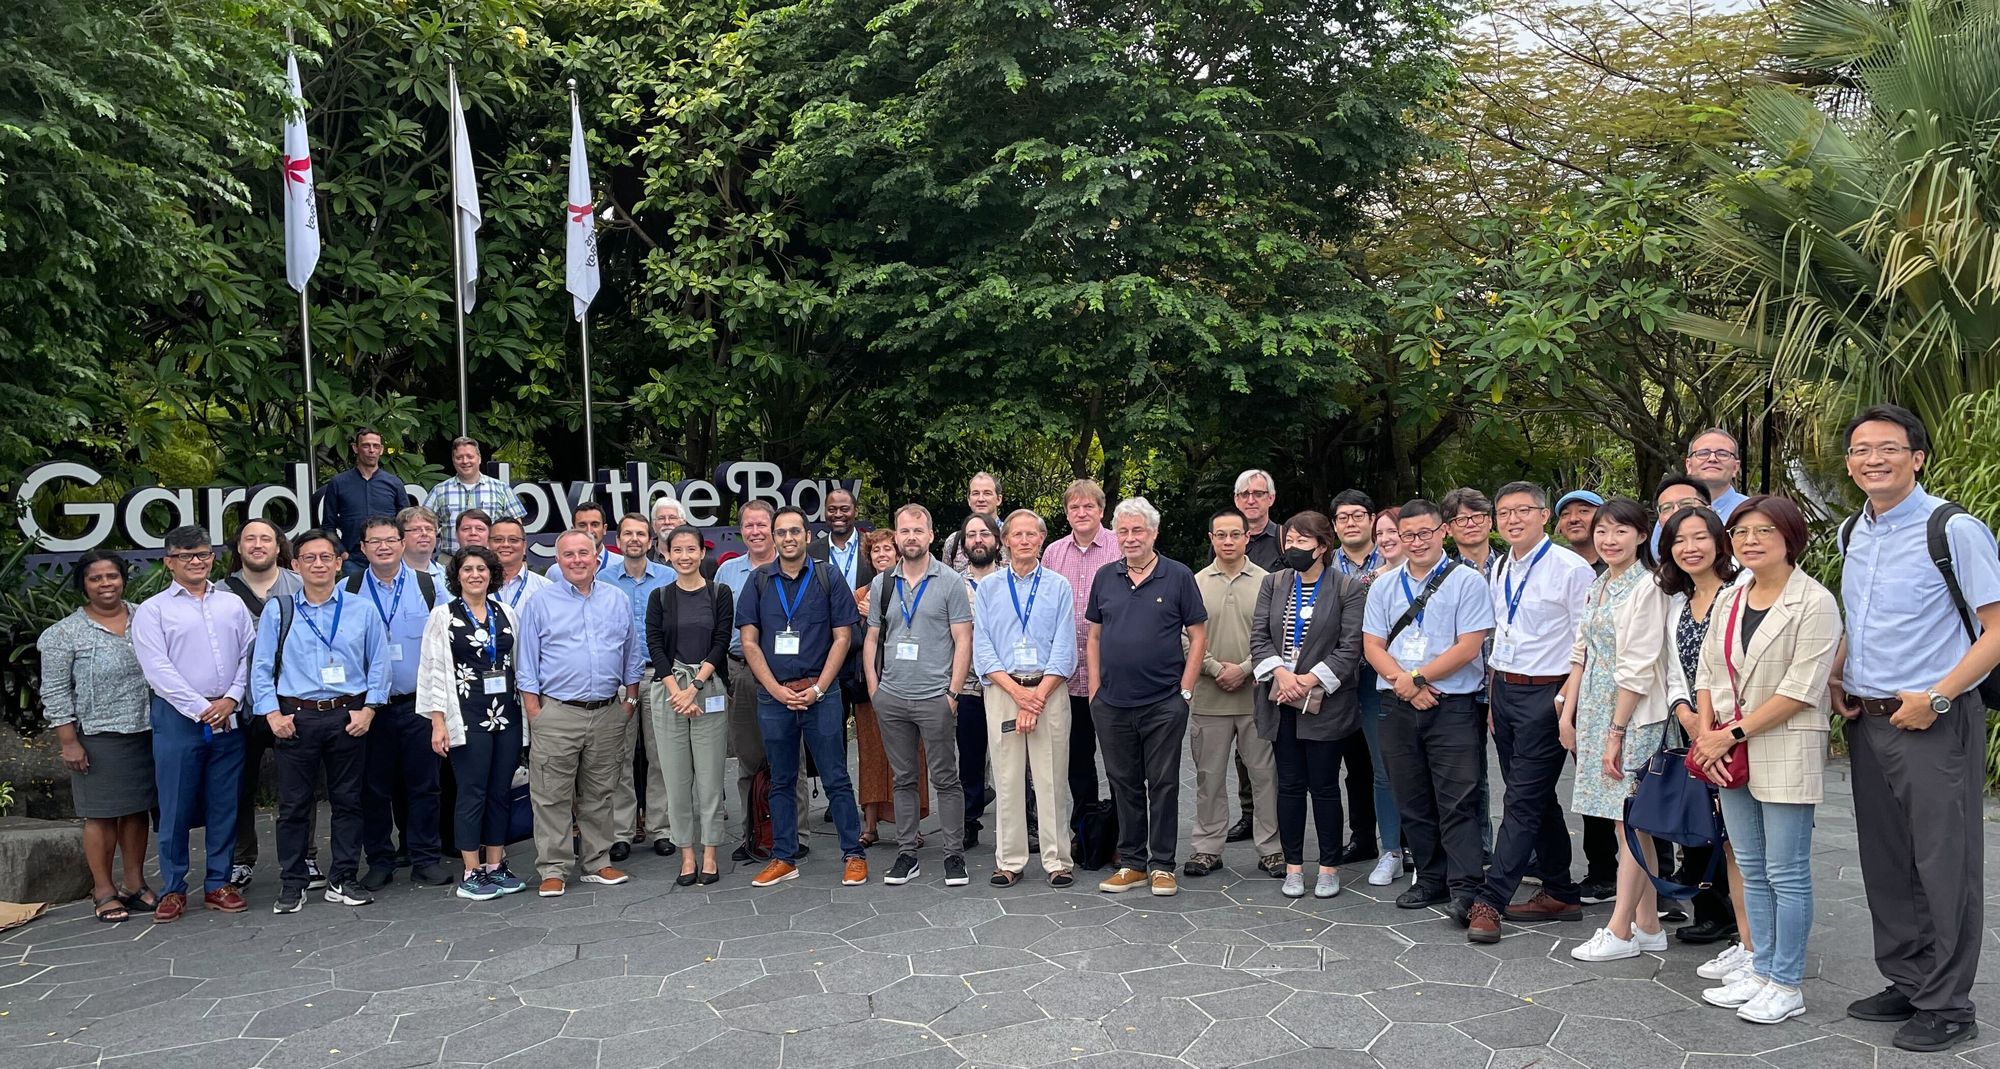 Attendees of the 124th OGC Member Meeting, Singapore